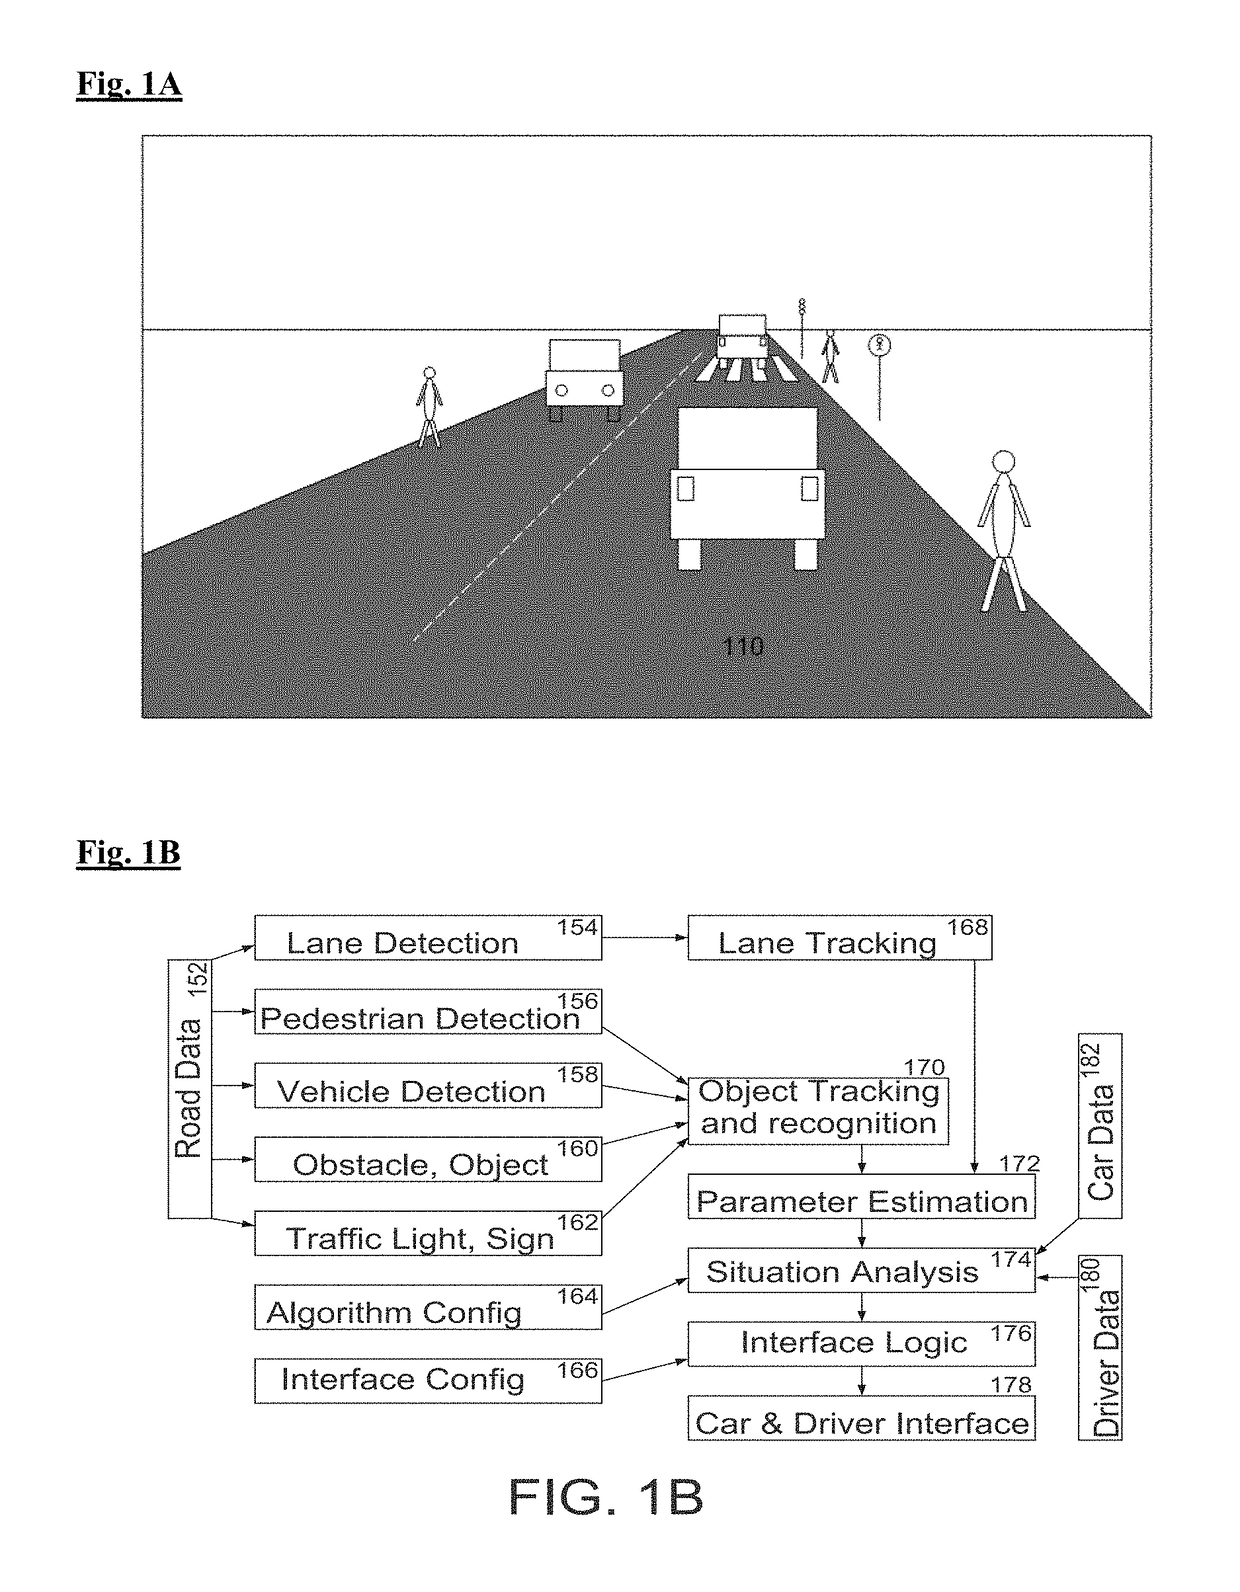 Computer Vision Based Driver Assistance Devices, Systems, Methods and Associated Computer Executable Code